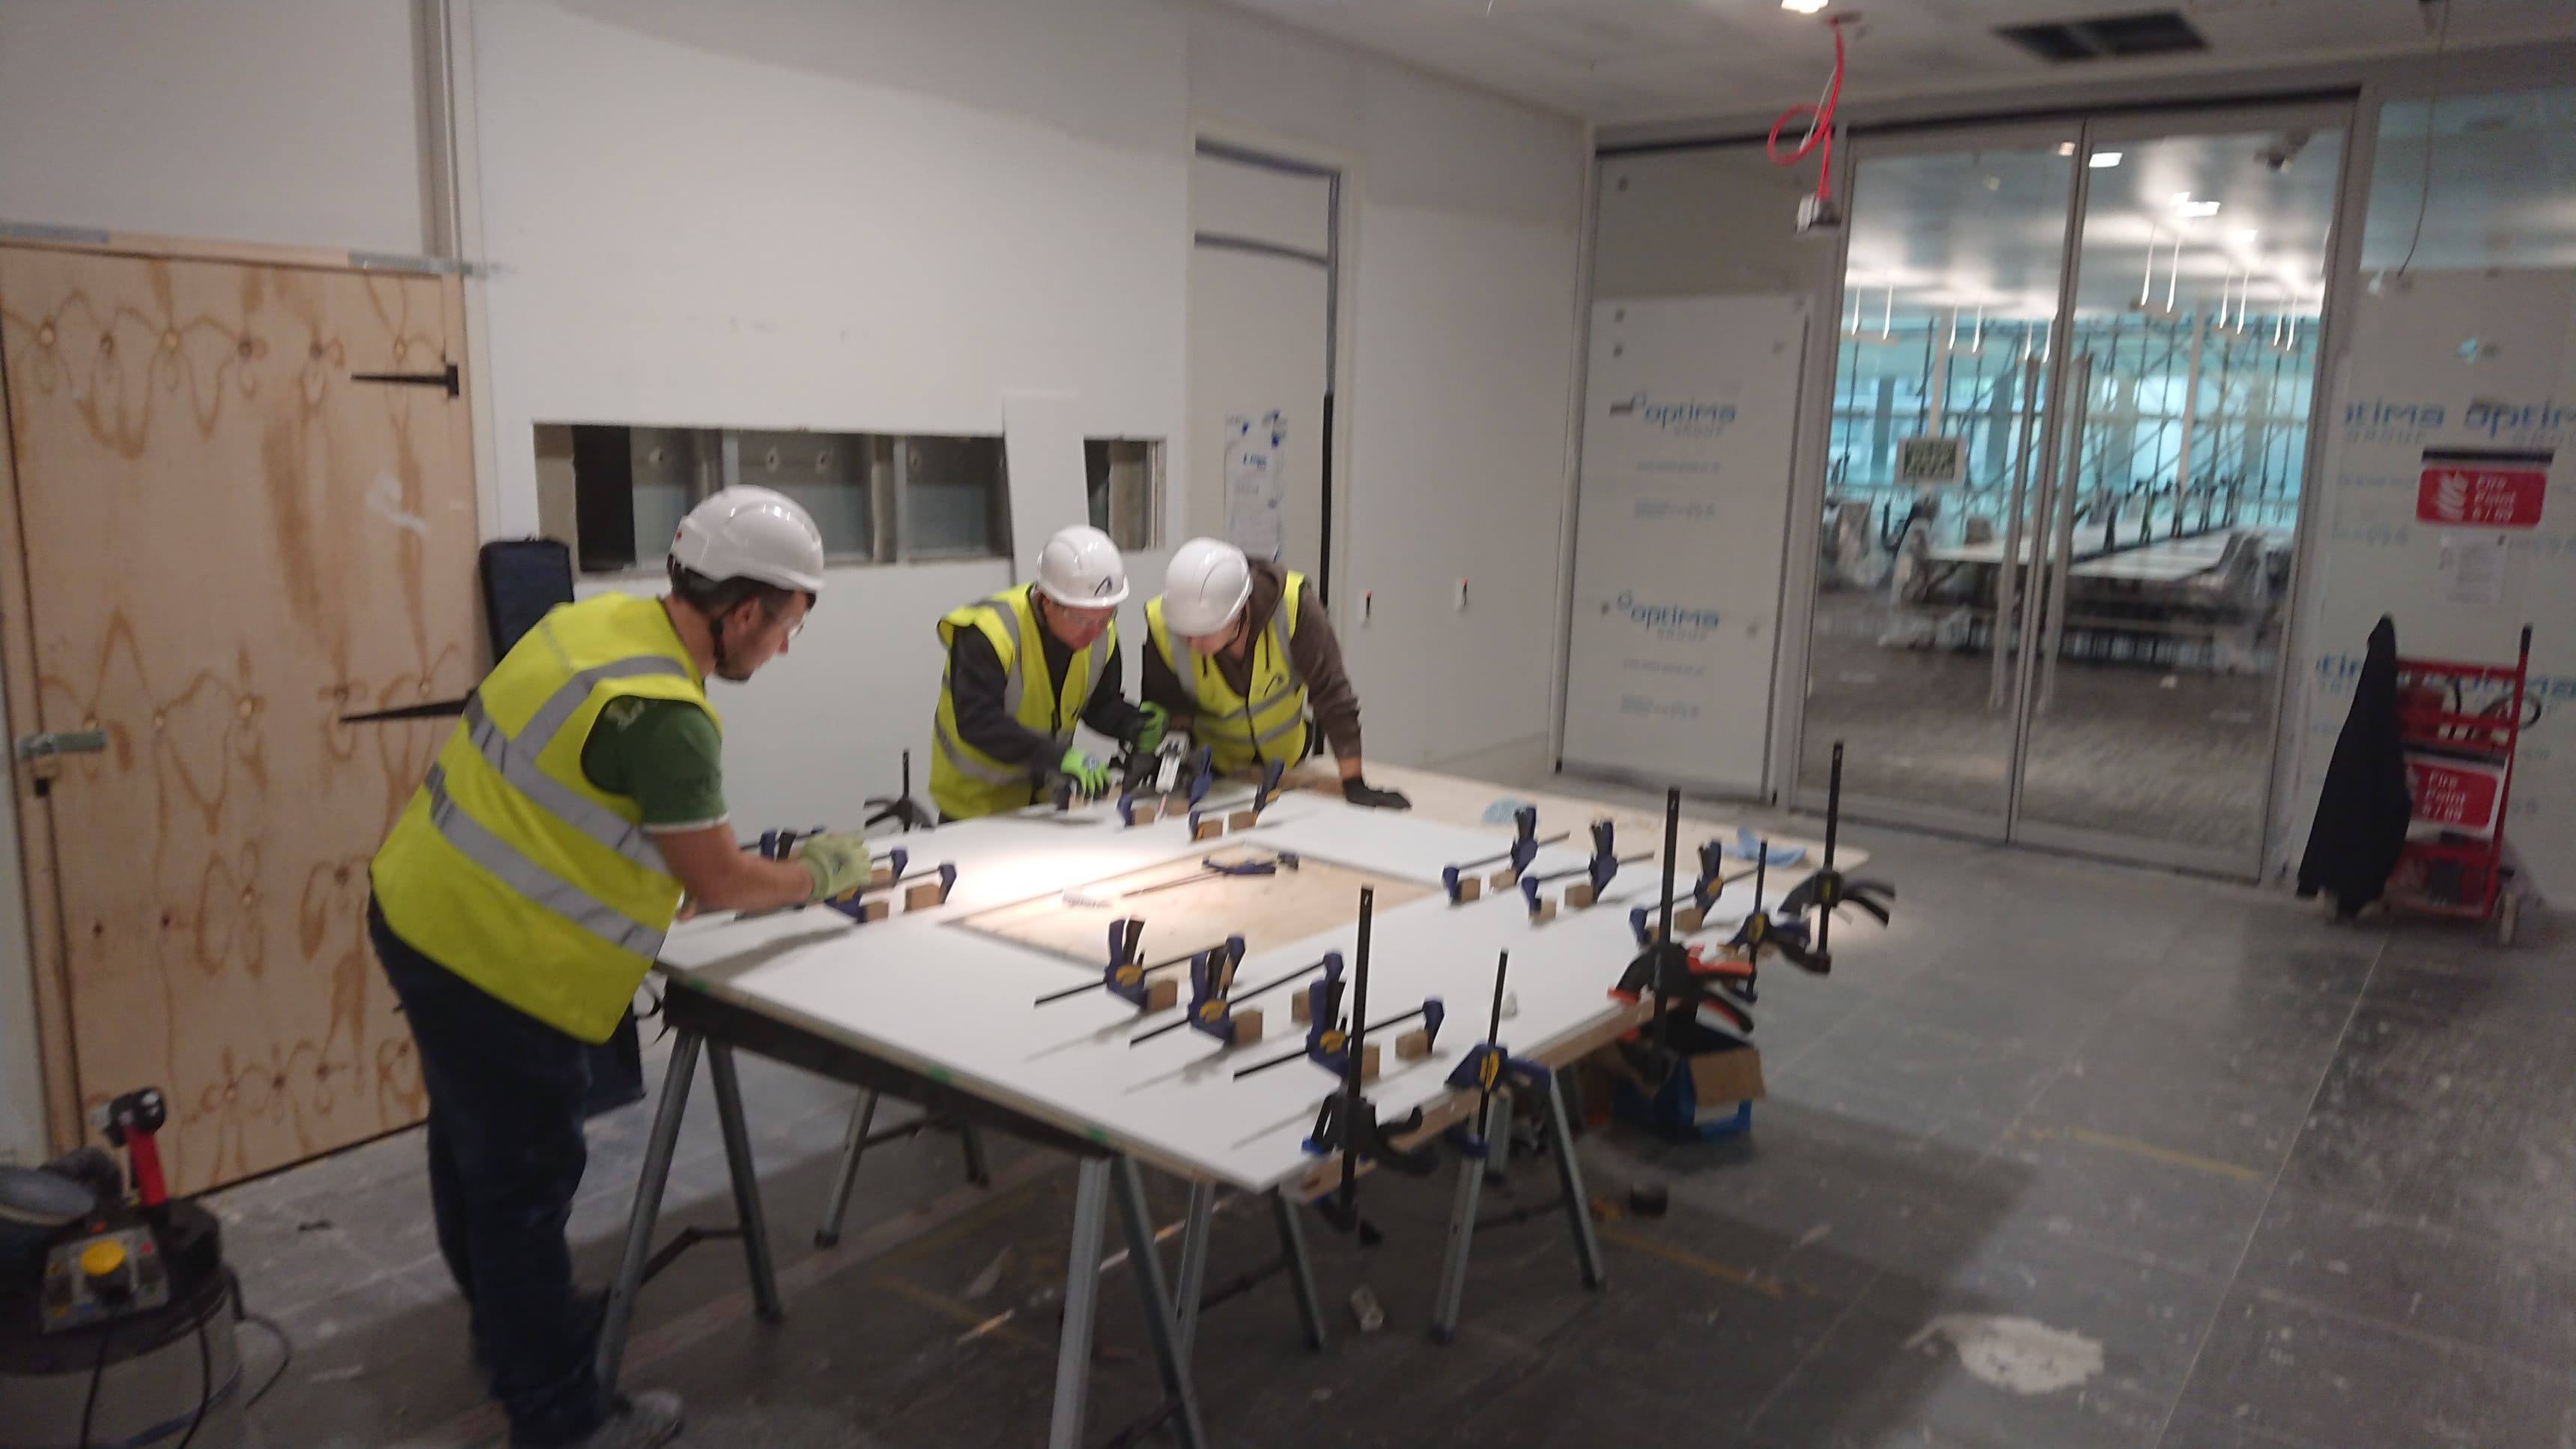 Plumtree Court, Shoe Lane, Central London, EC4 - Skilled Corian fitters 7